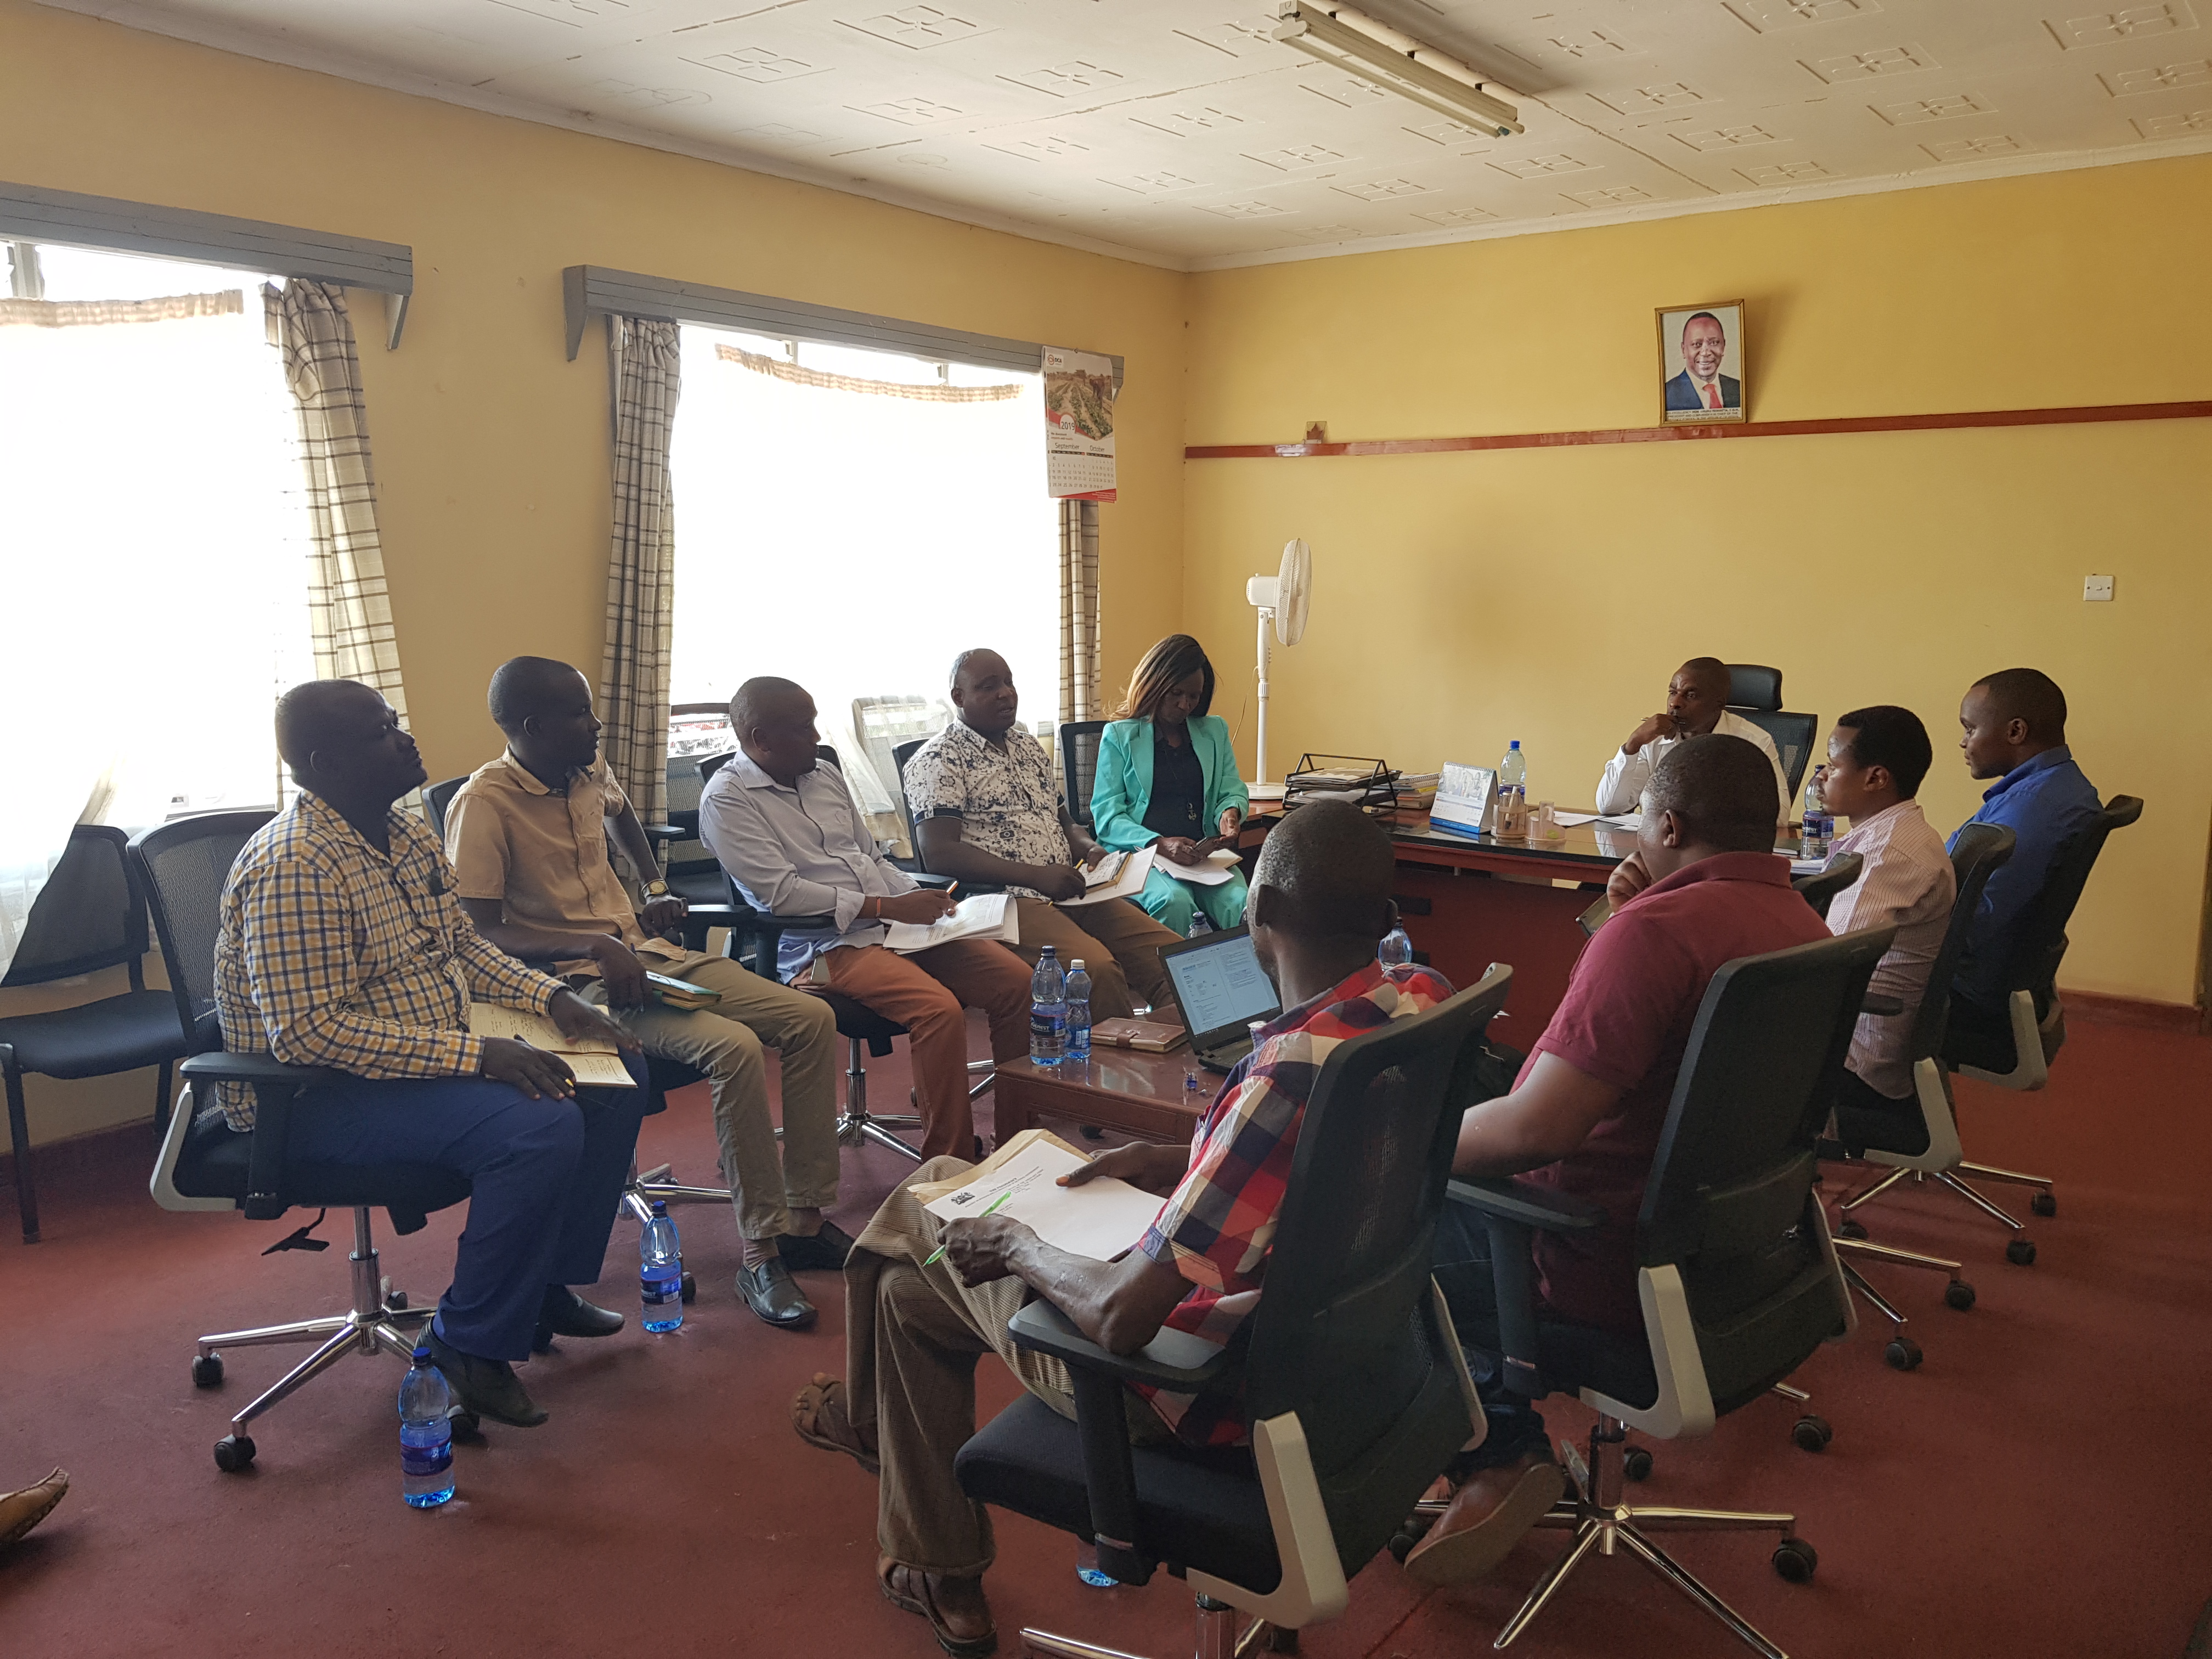 Turkana County Government and Local Leaders in inception meeting to discuss priorities and considerations for UN-Habitat plan near the LAPSSET corridor. 